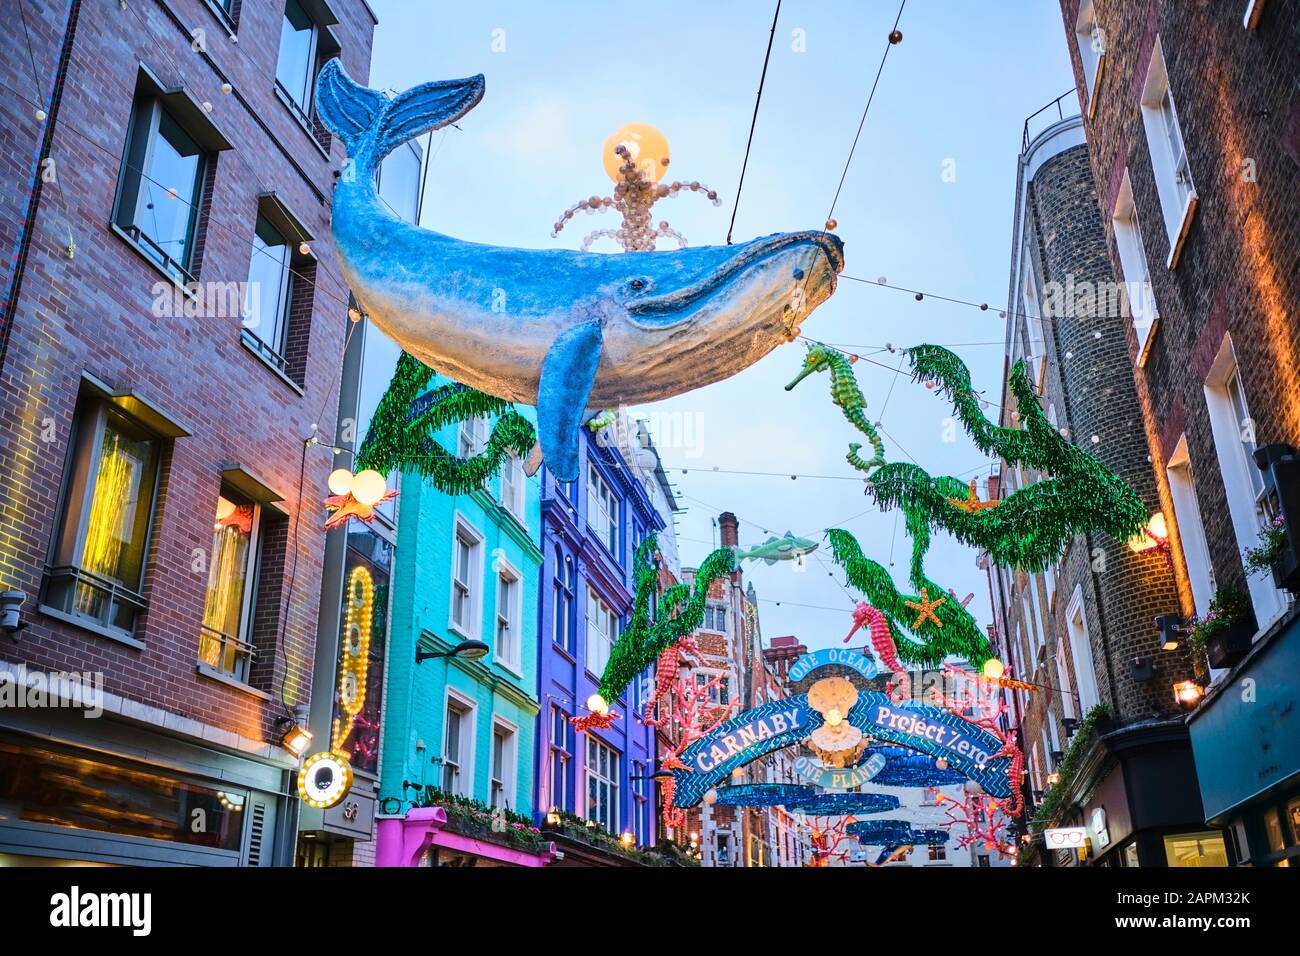 UK, England, London, Sealife decorations hanging over Carnaby Street during ocean conservation charity event Stock Photo